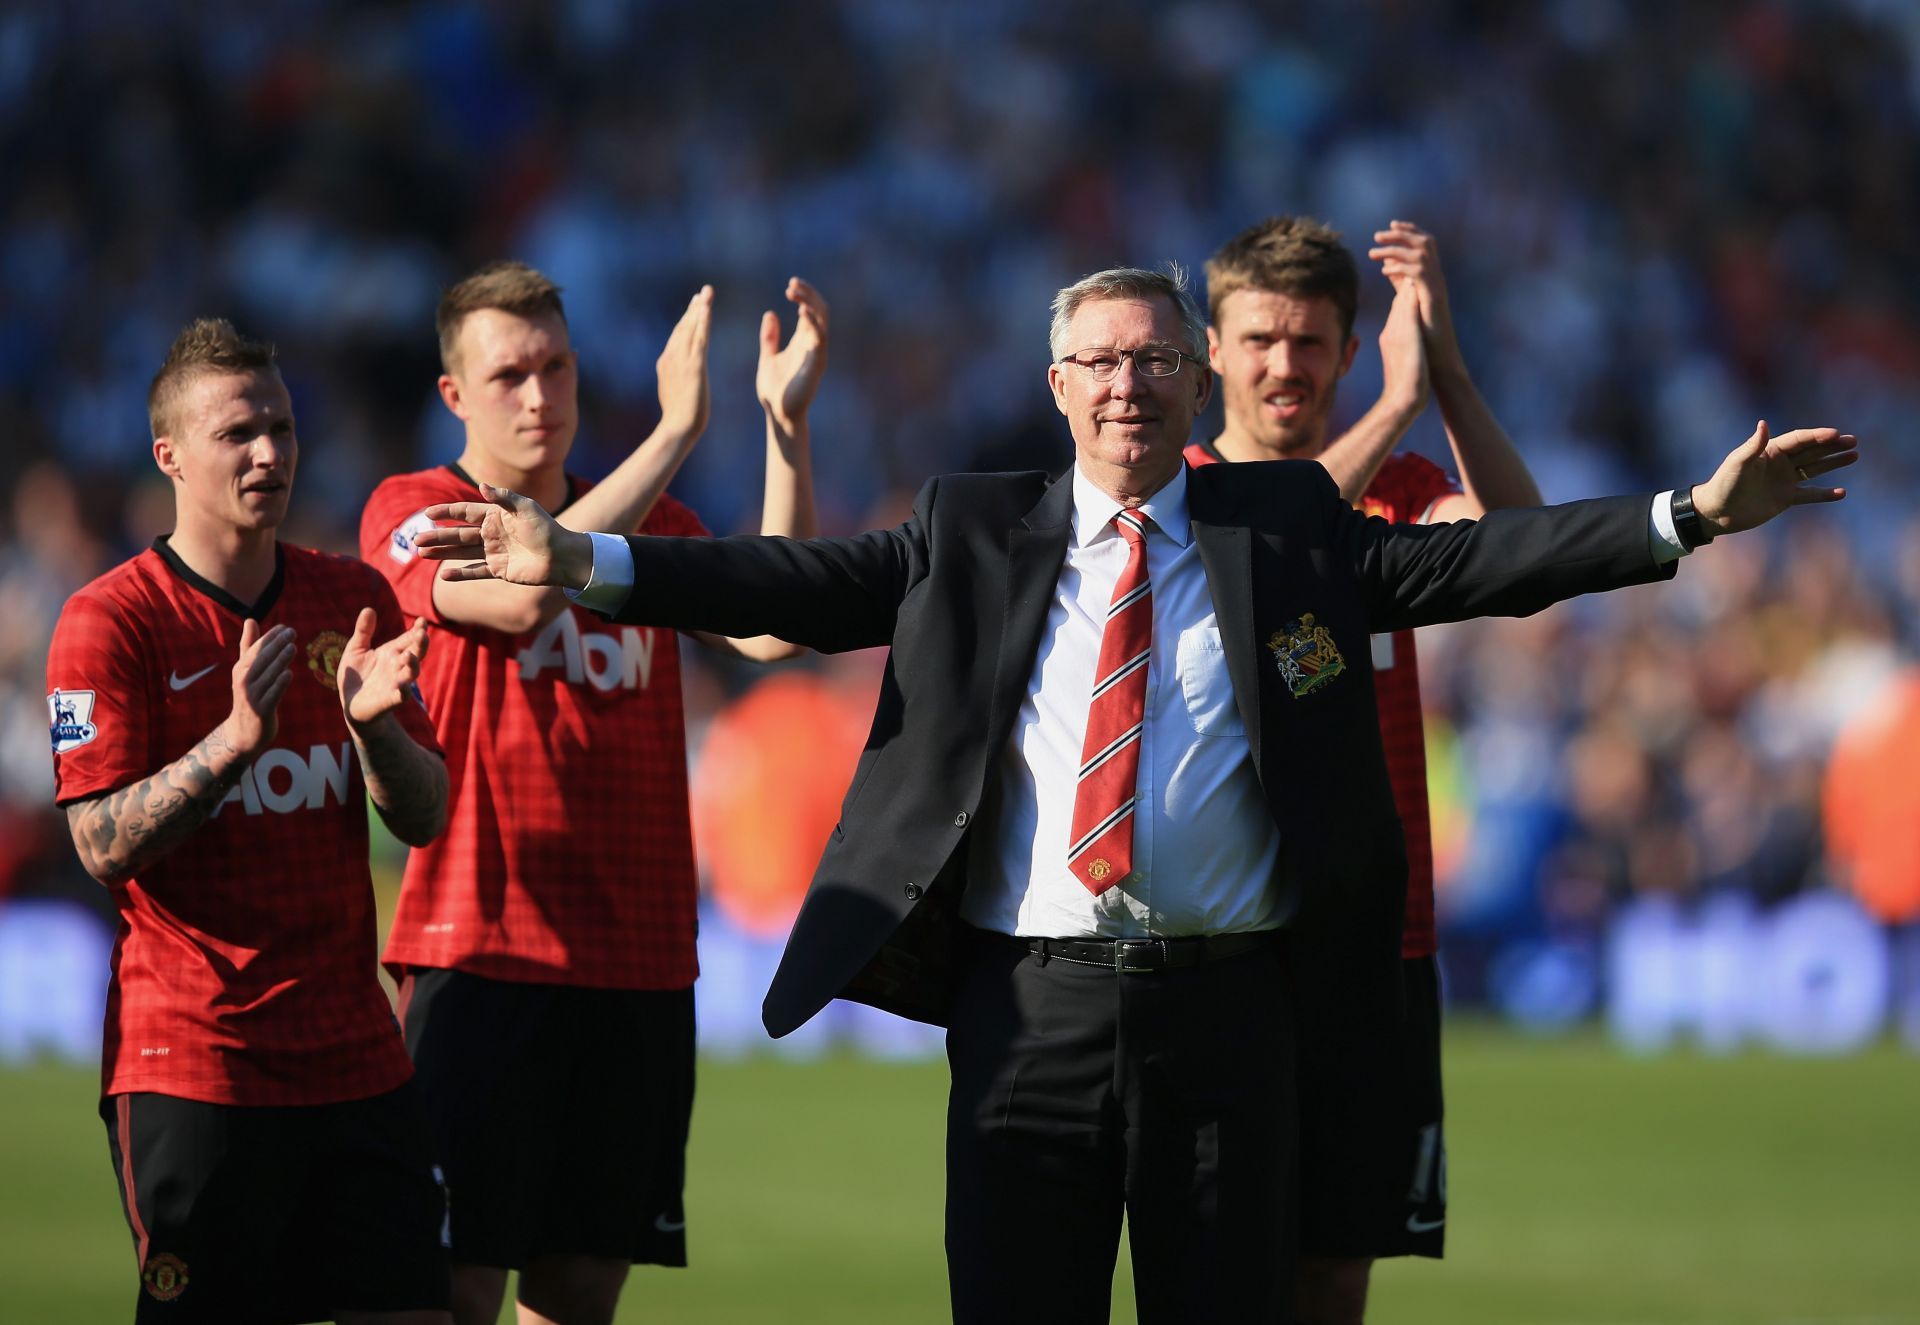 Sir Alex applauded by the fans and players on his 1500th and last game for Manchester United